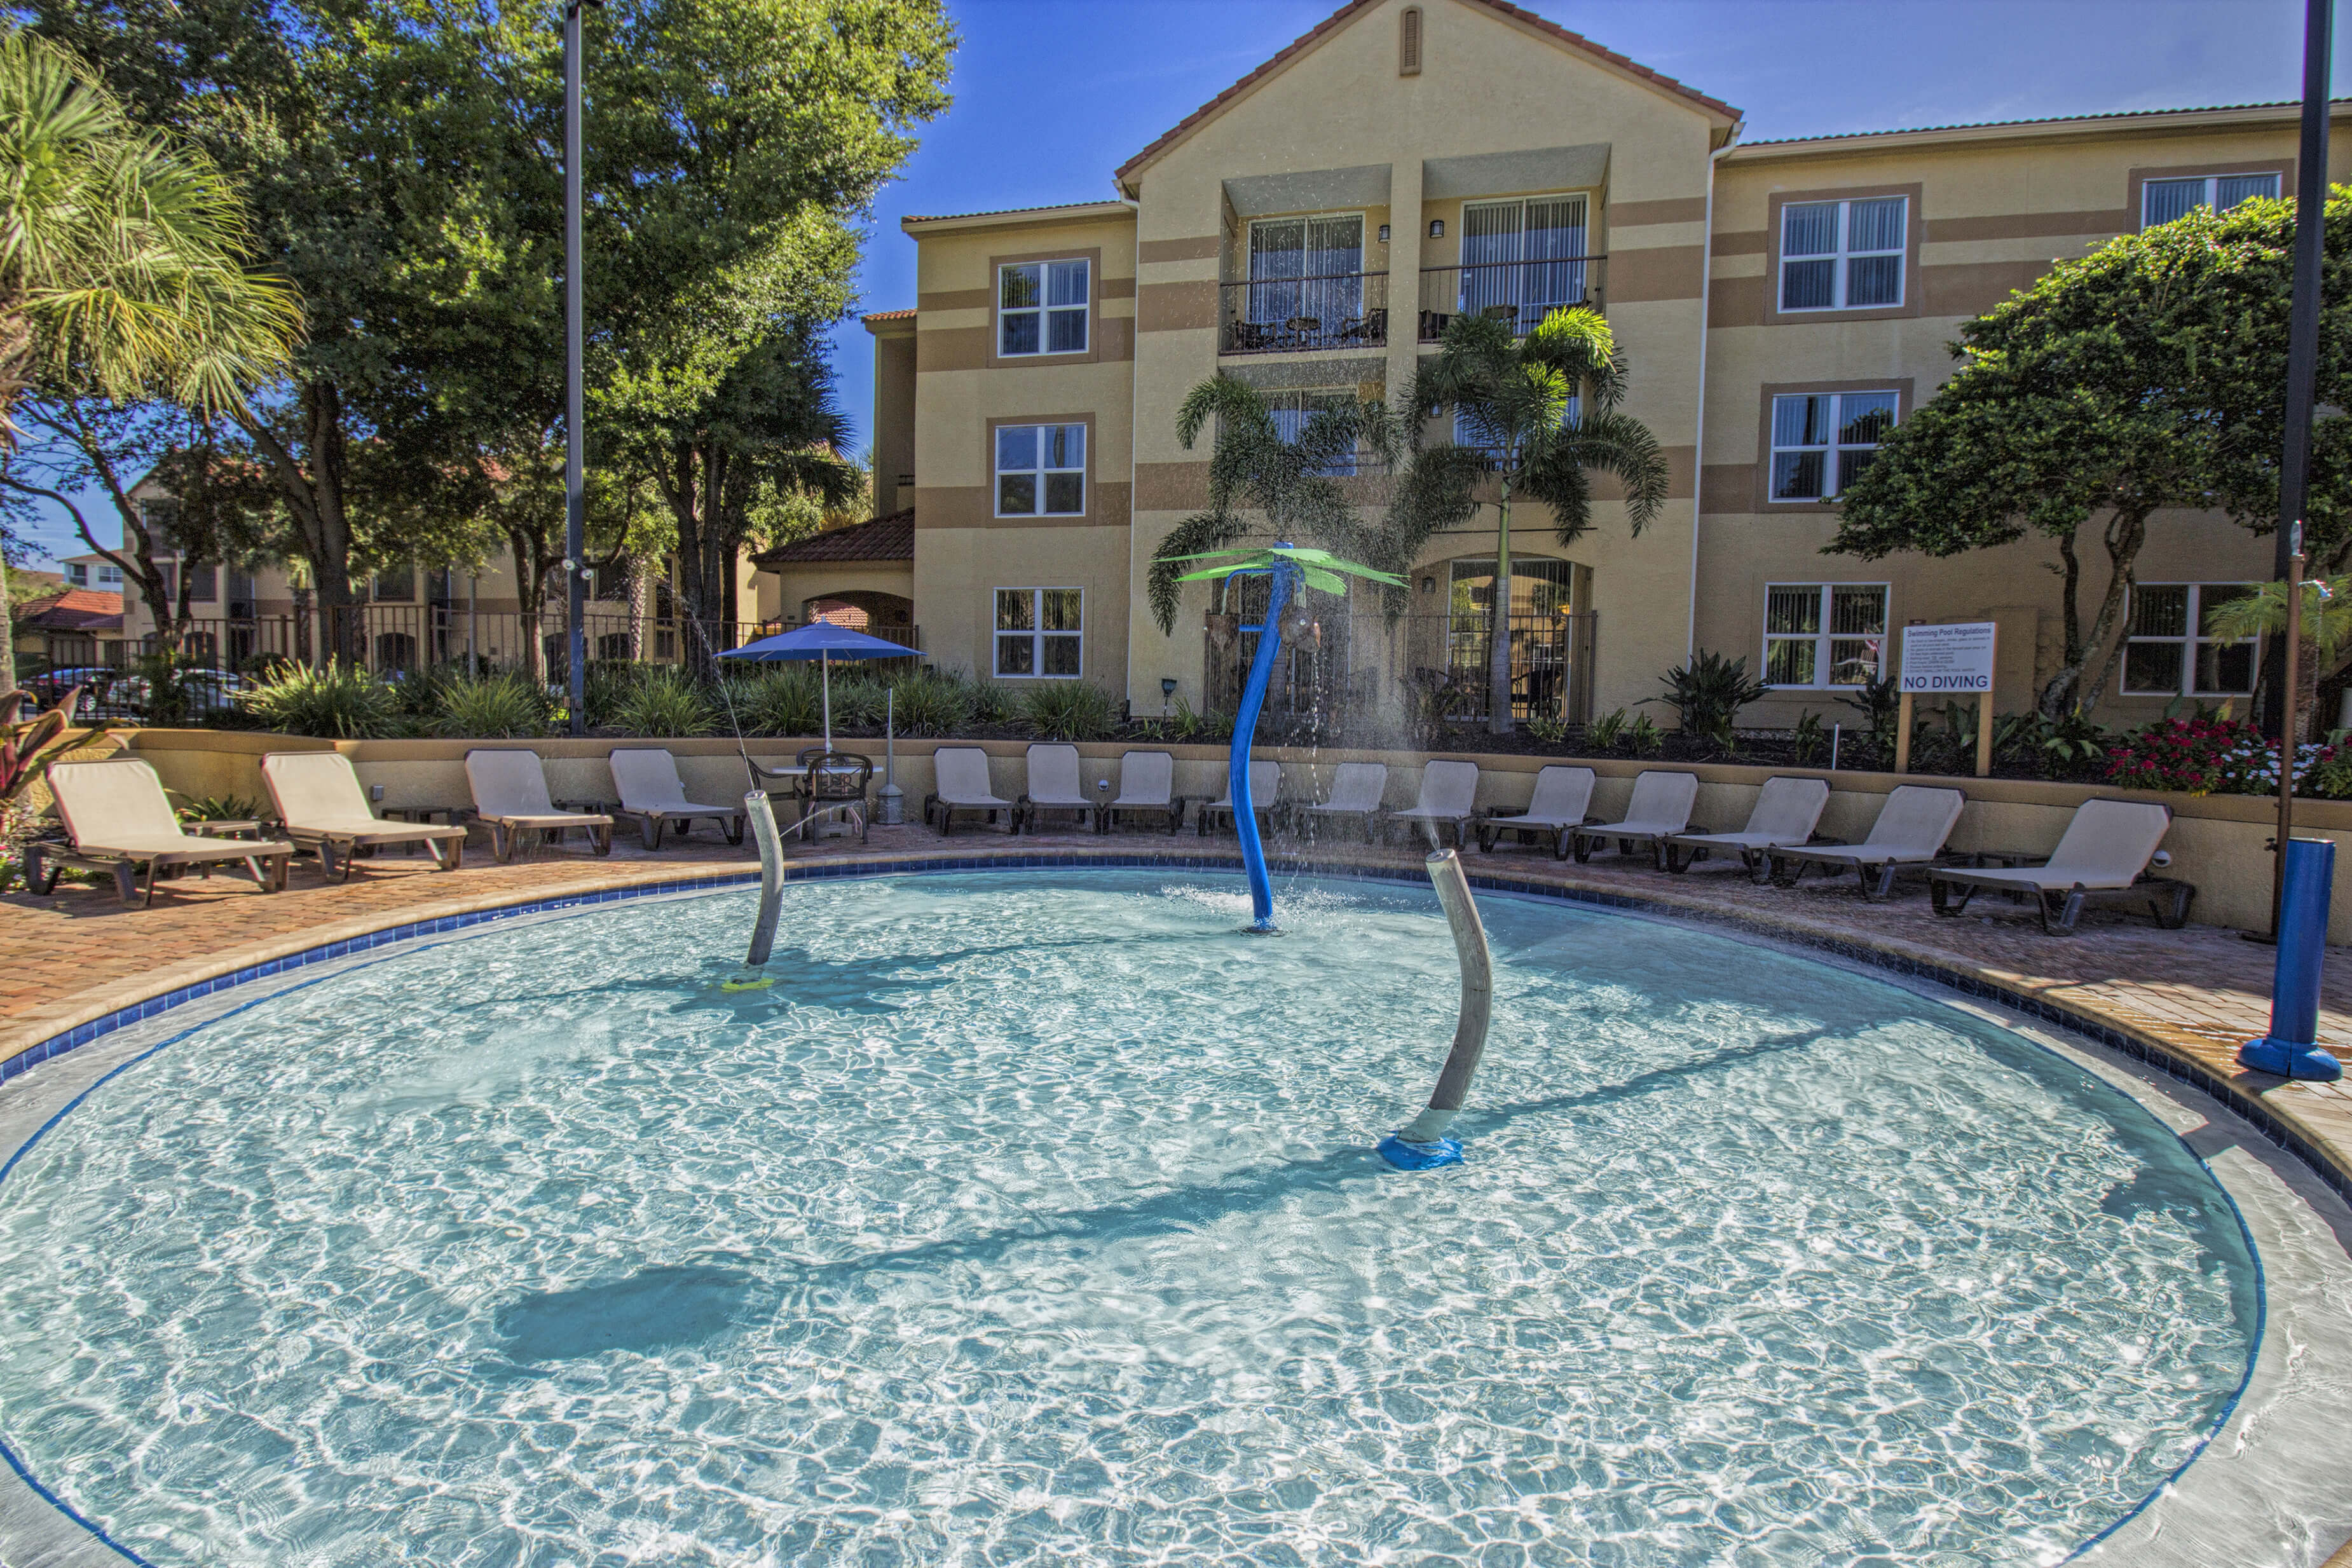 Children's water play area surrounded by lounge chairs | Westgate Blue Tree Resort